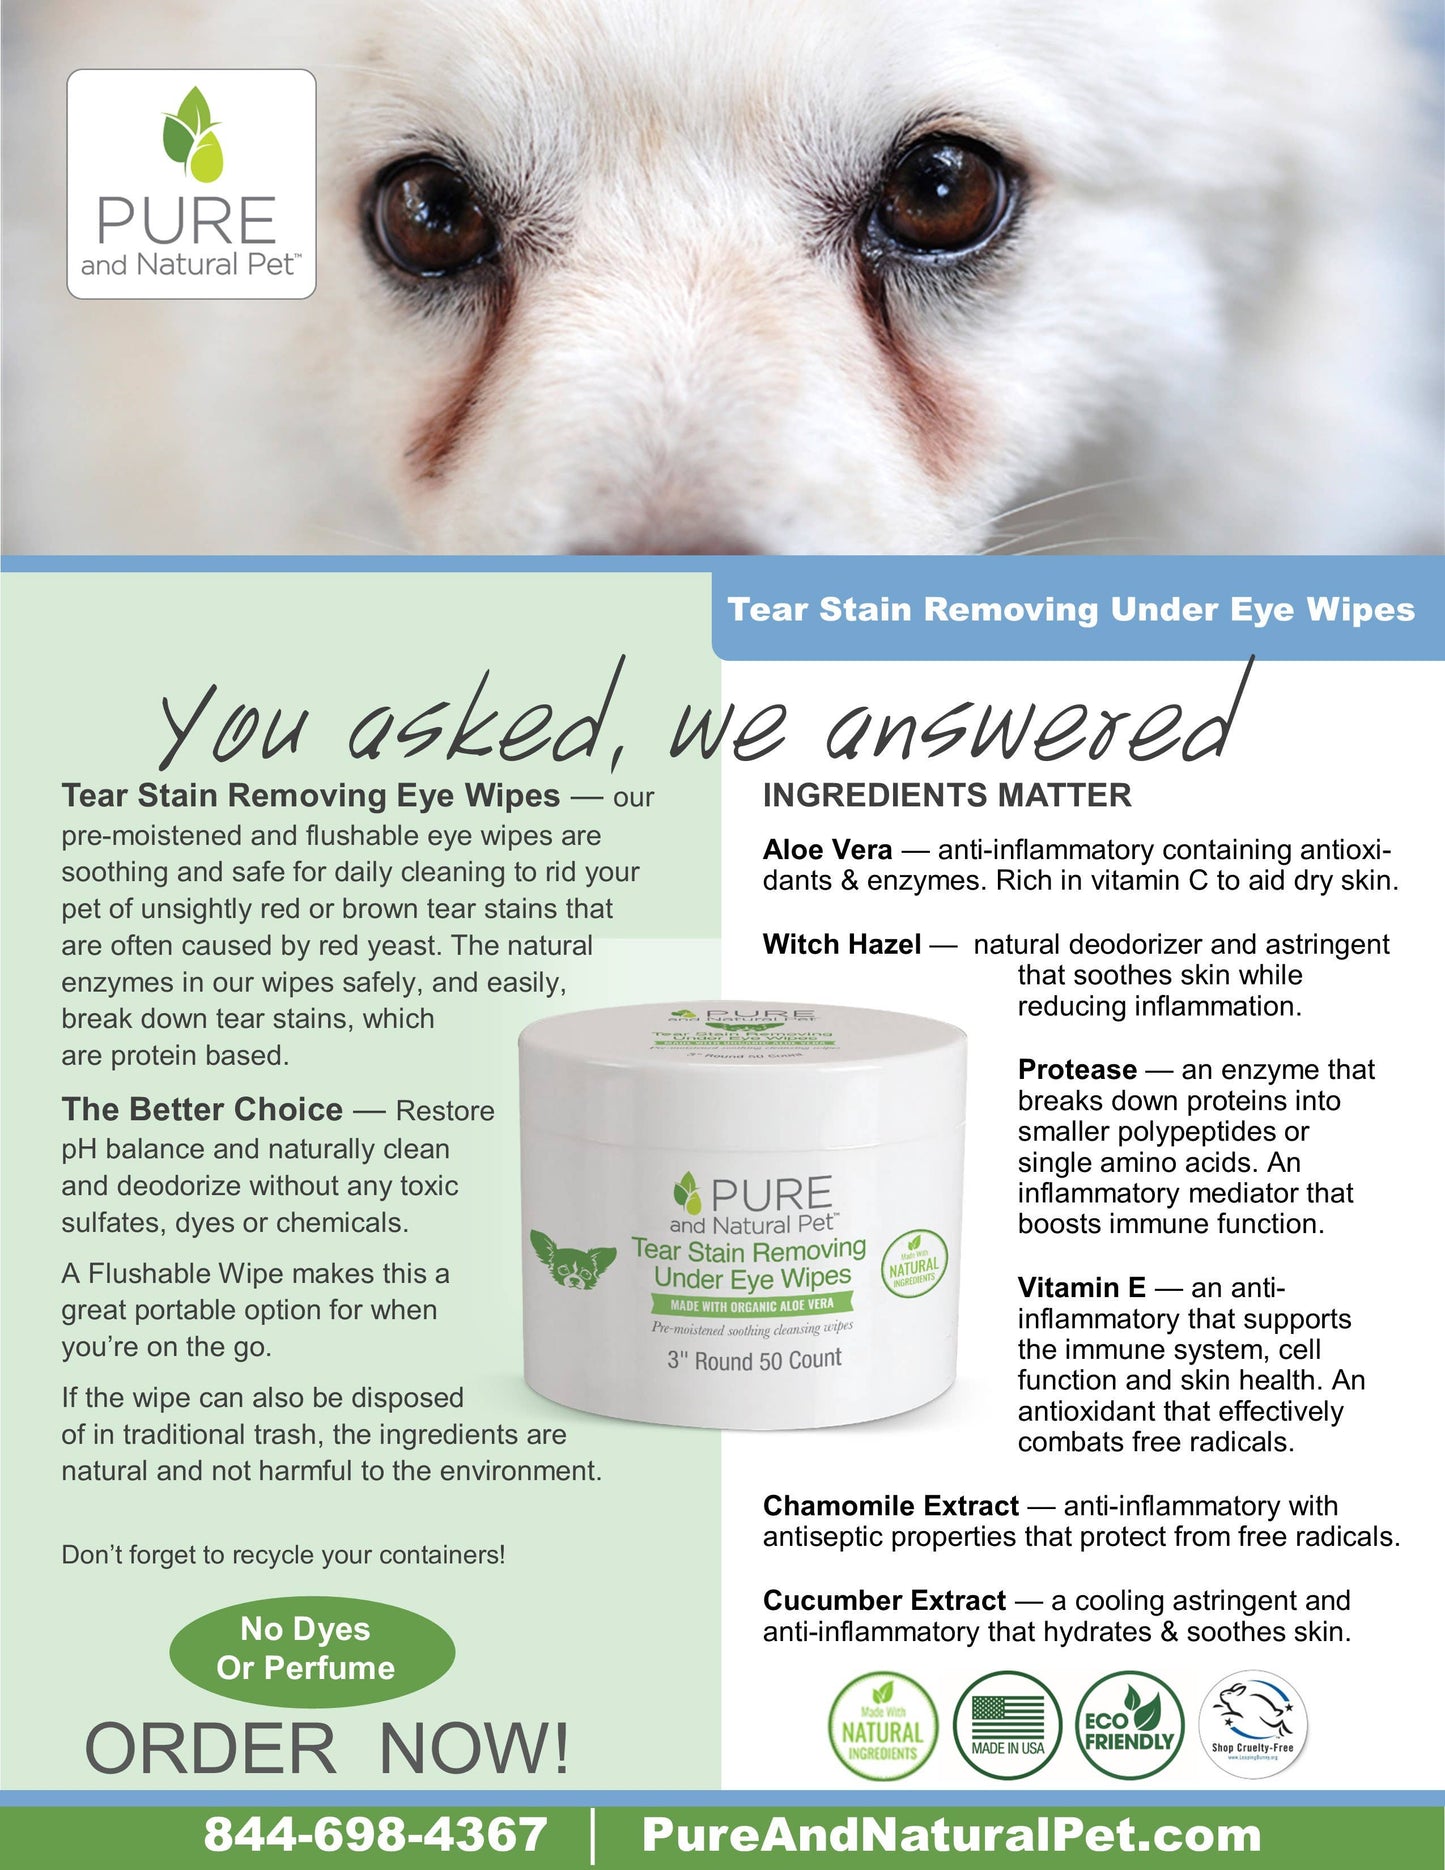 Tear Stain Removing Under Eye Wipes for Dogs